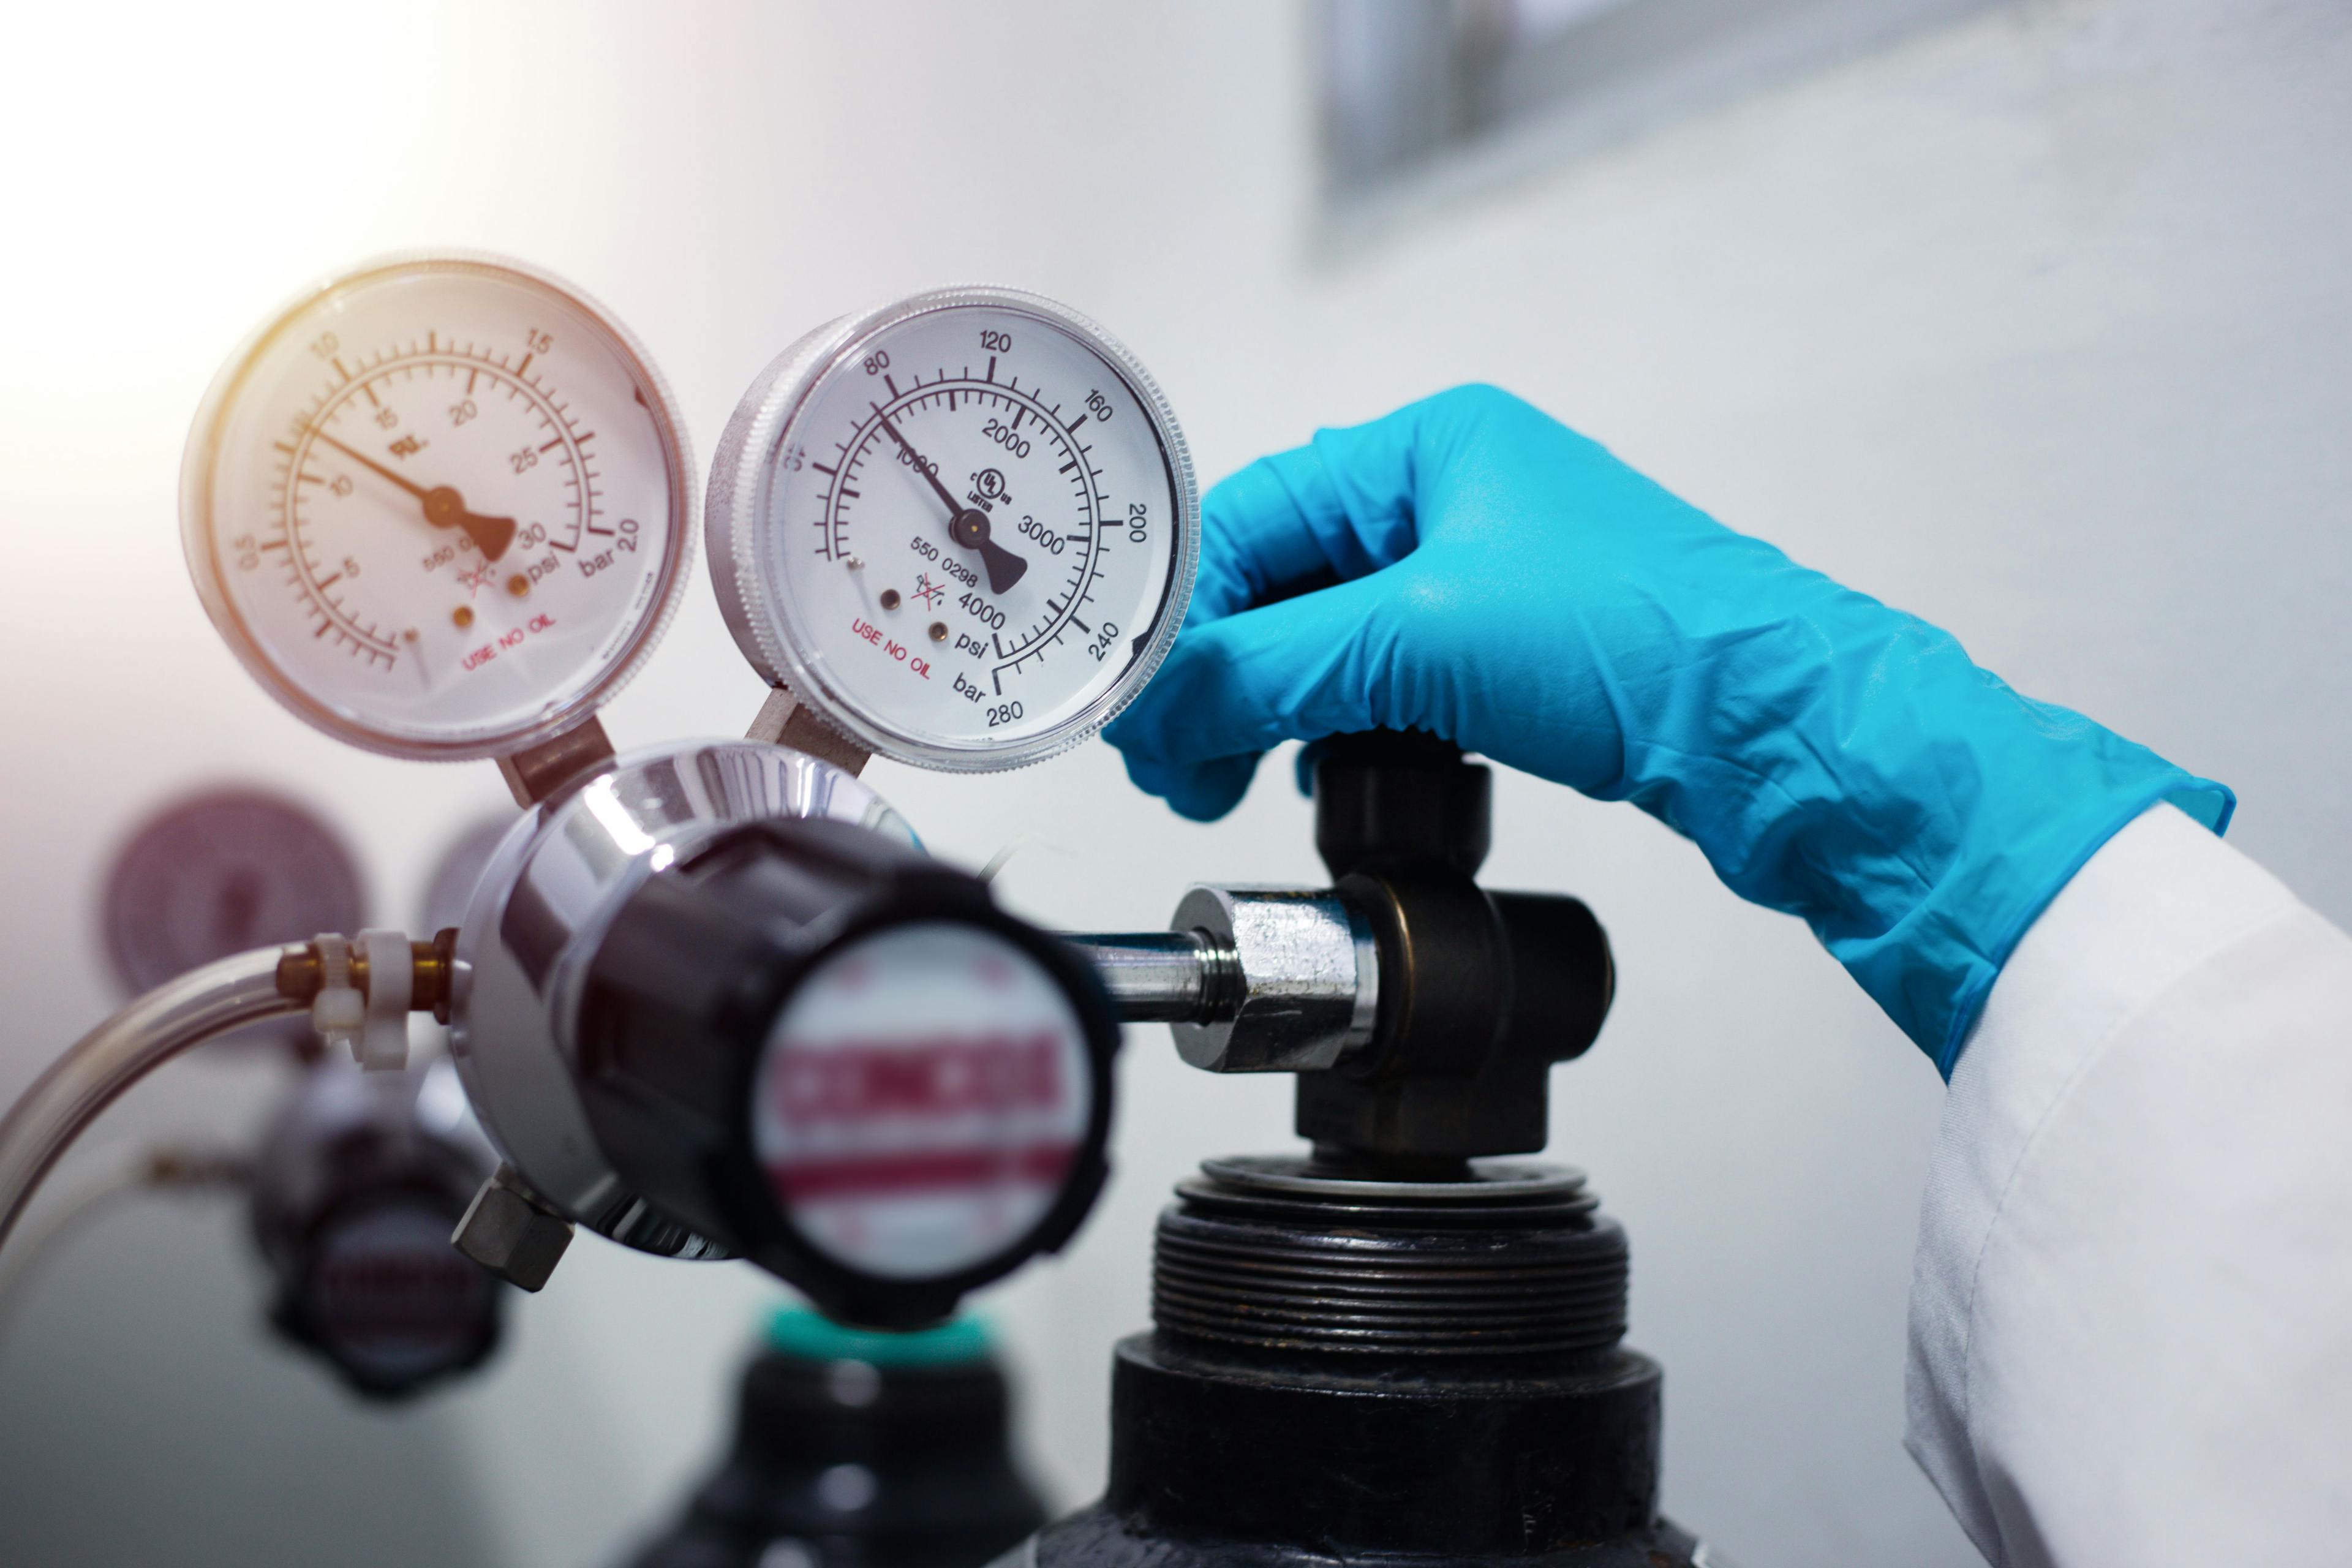 Closeup of a scientist's hand, checking gas from pressure gauge for a laboratory chromatography device during research | Image Credit: © S. Singha - stock.adobe.com